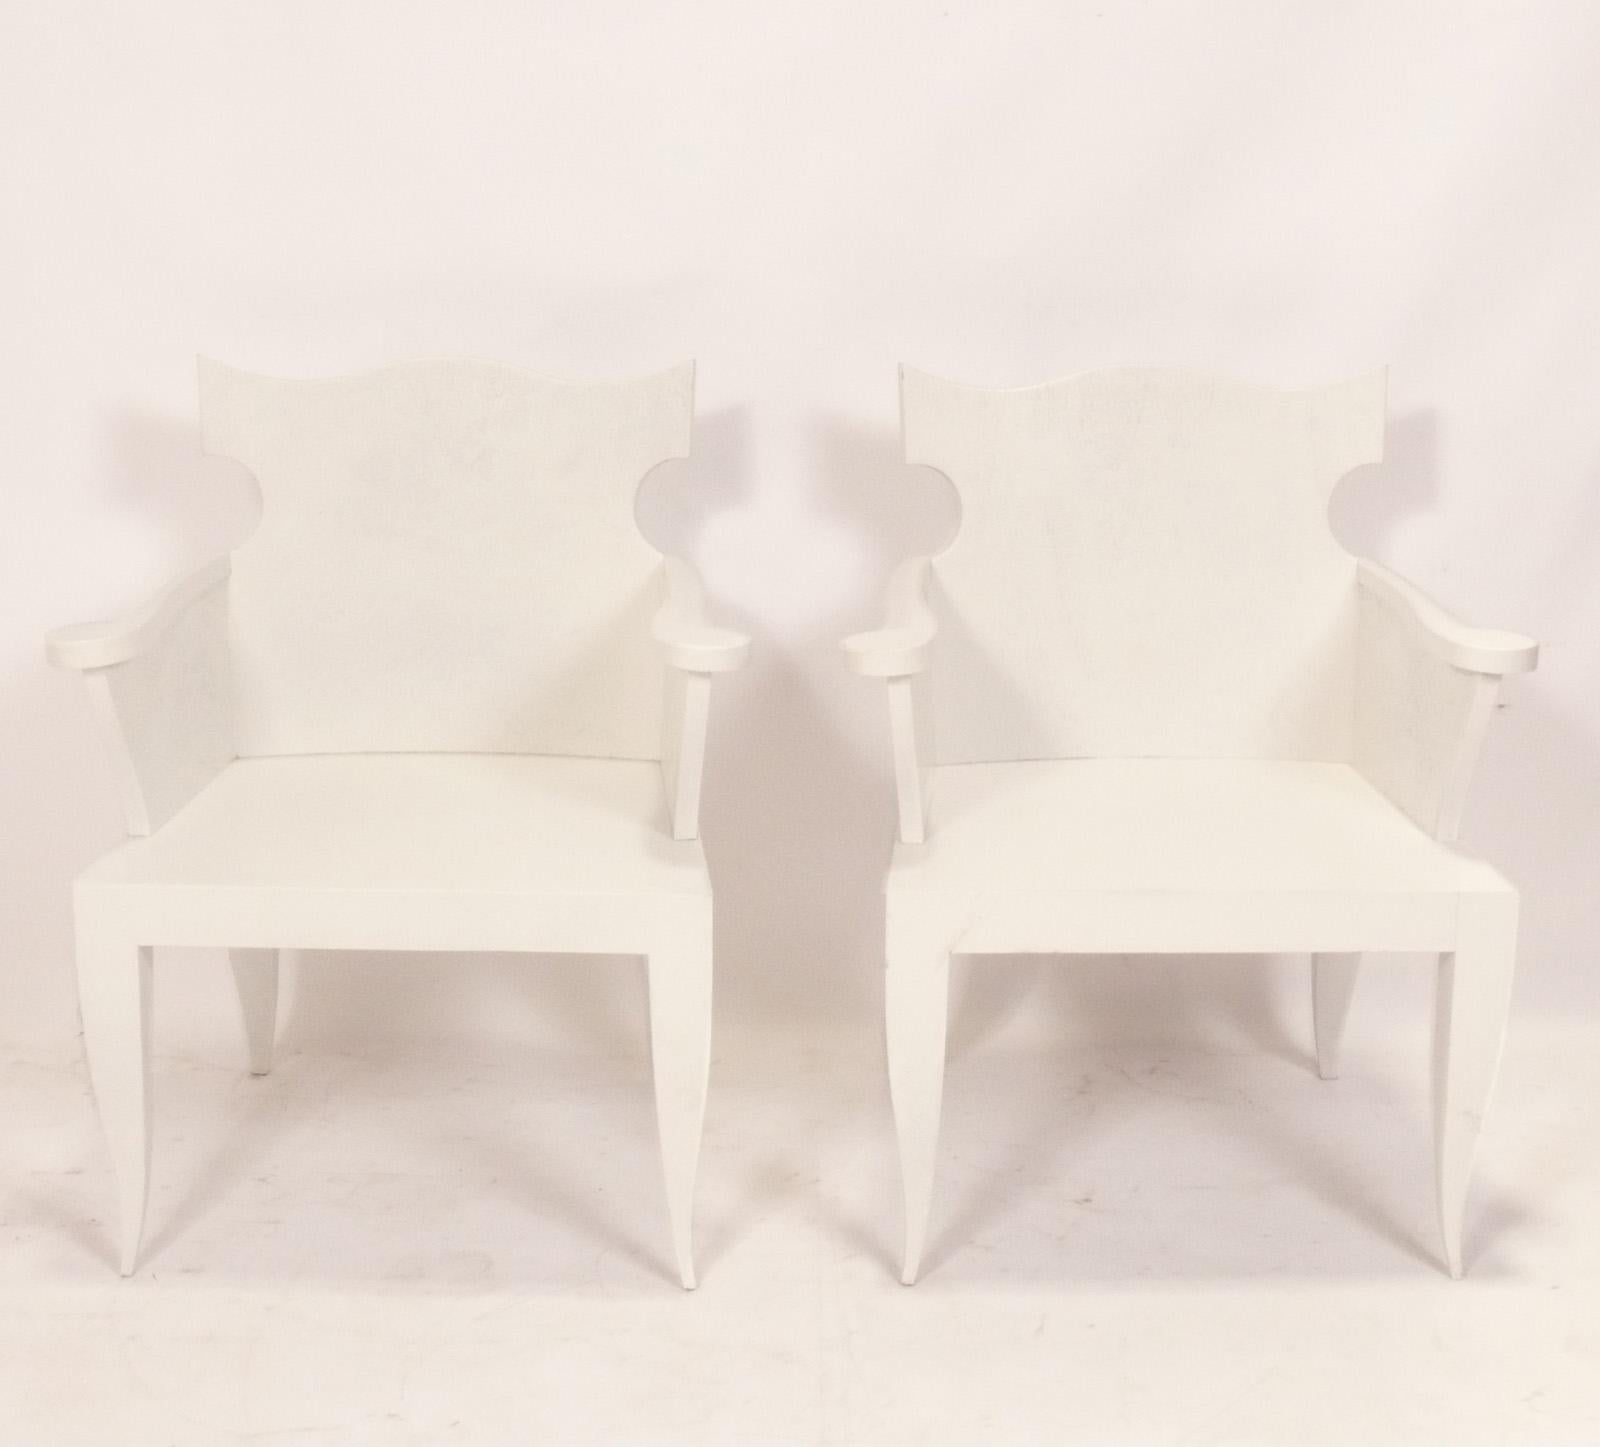 Pair of Sculptural Custom Wood Armchairs, American, circa 2000s. These chairs were custom made for an Atlanta Show House. They can be refinished in your choice of color (including the white color as shown). If you would like us to make cushions for